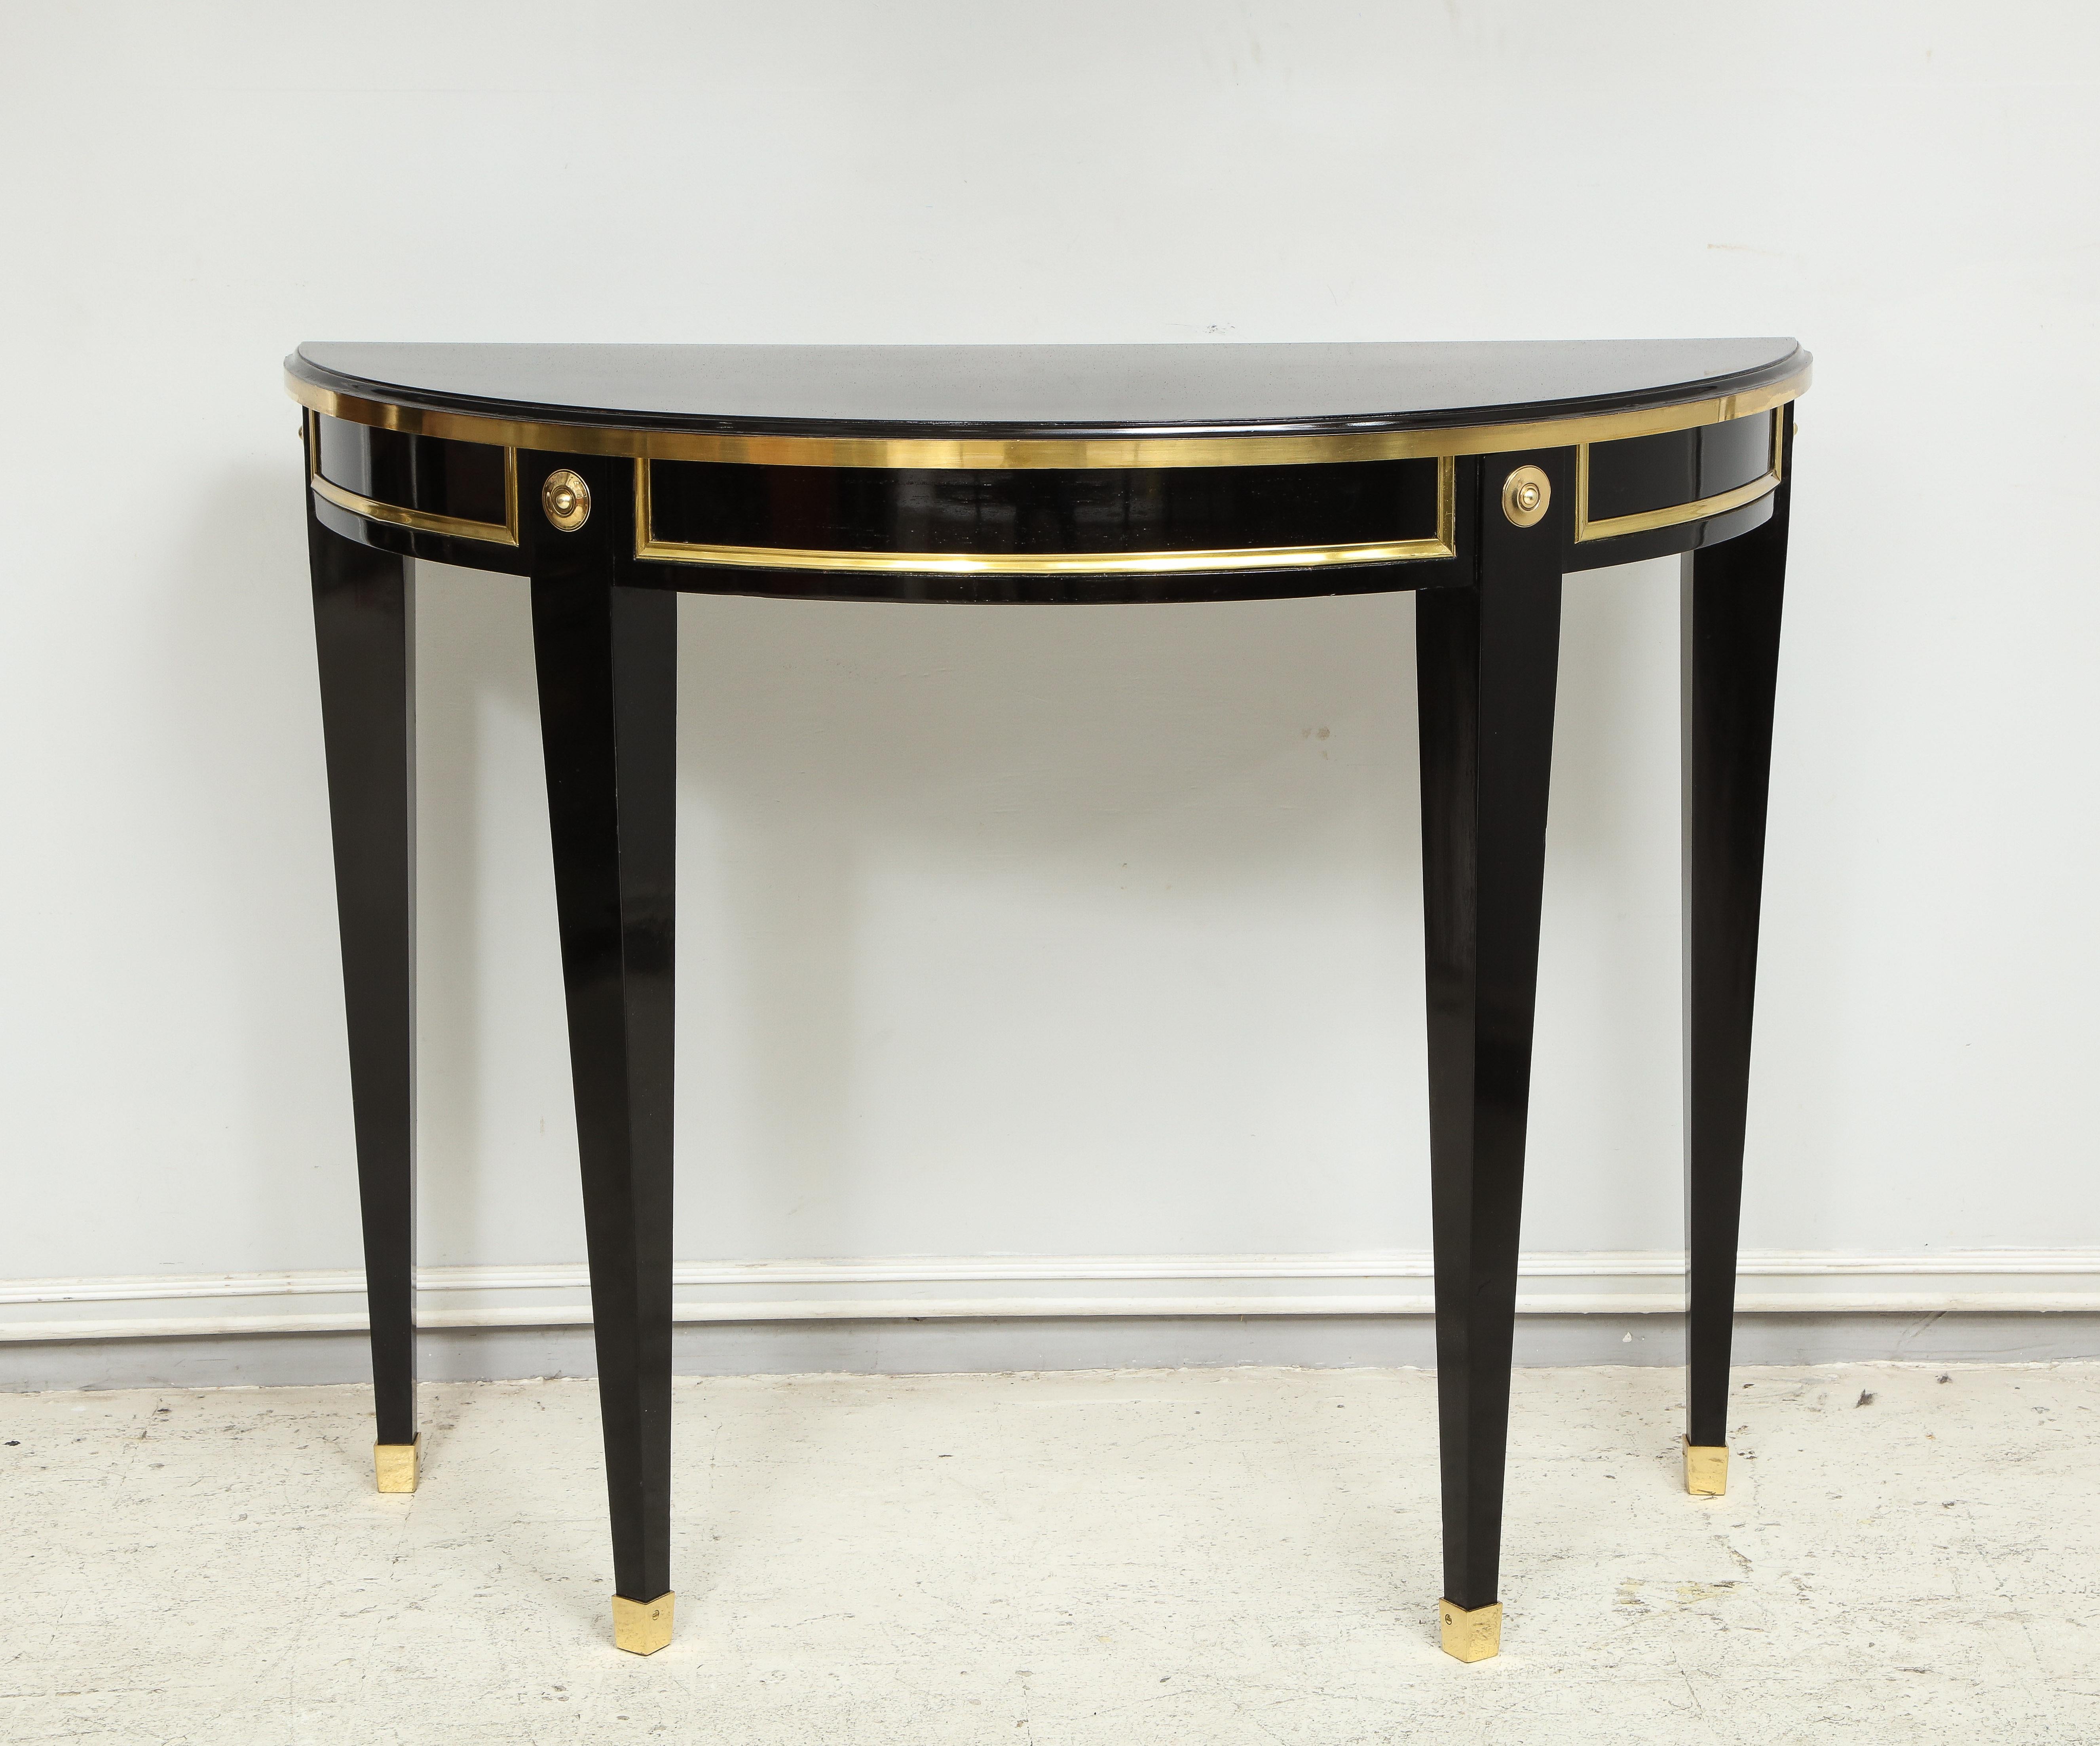 Neoclassical Pair of Bespoke Consoles in the Neoclassic Style with Brass Banding For Sale